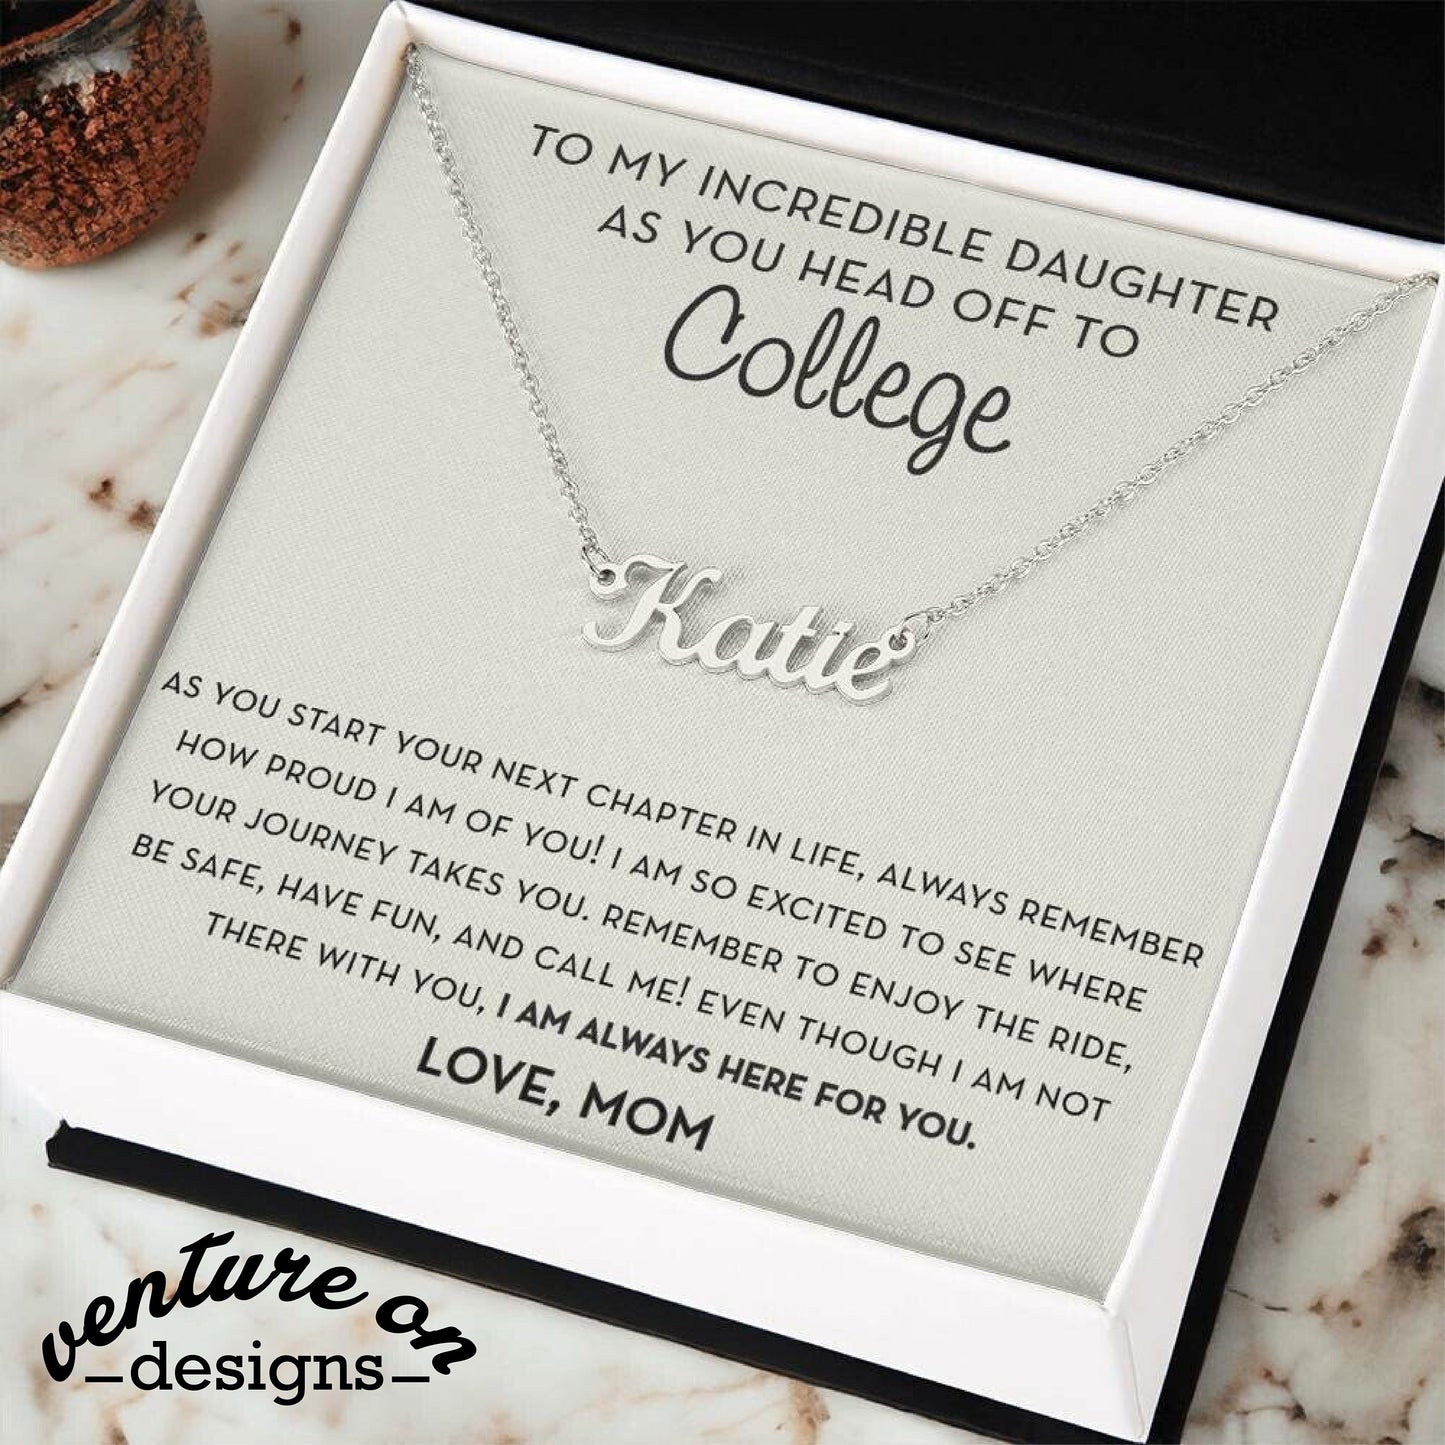 Personalized Gift for Daughter Going to College, Off to College Card, Mother Daughter Gift, Freshman Daughter Gift, Starting College Gift